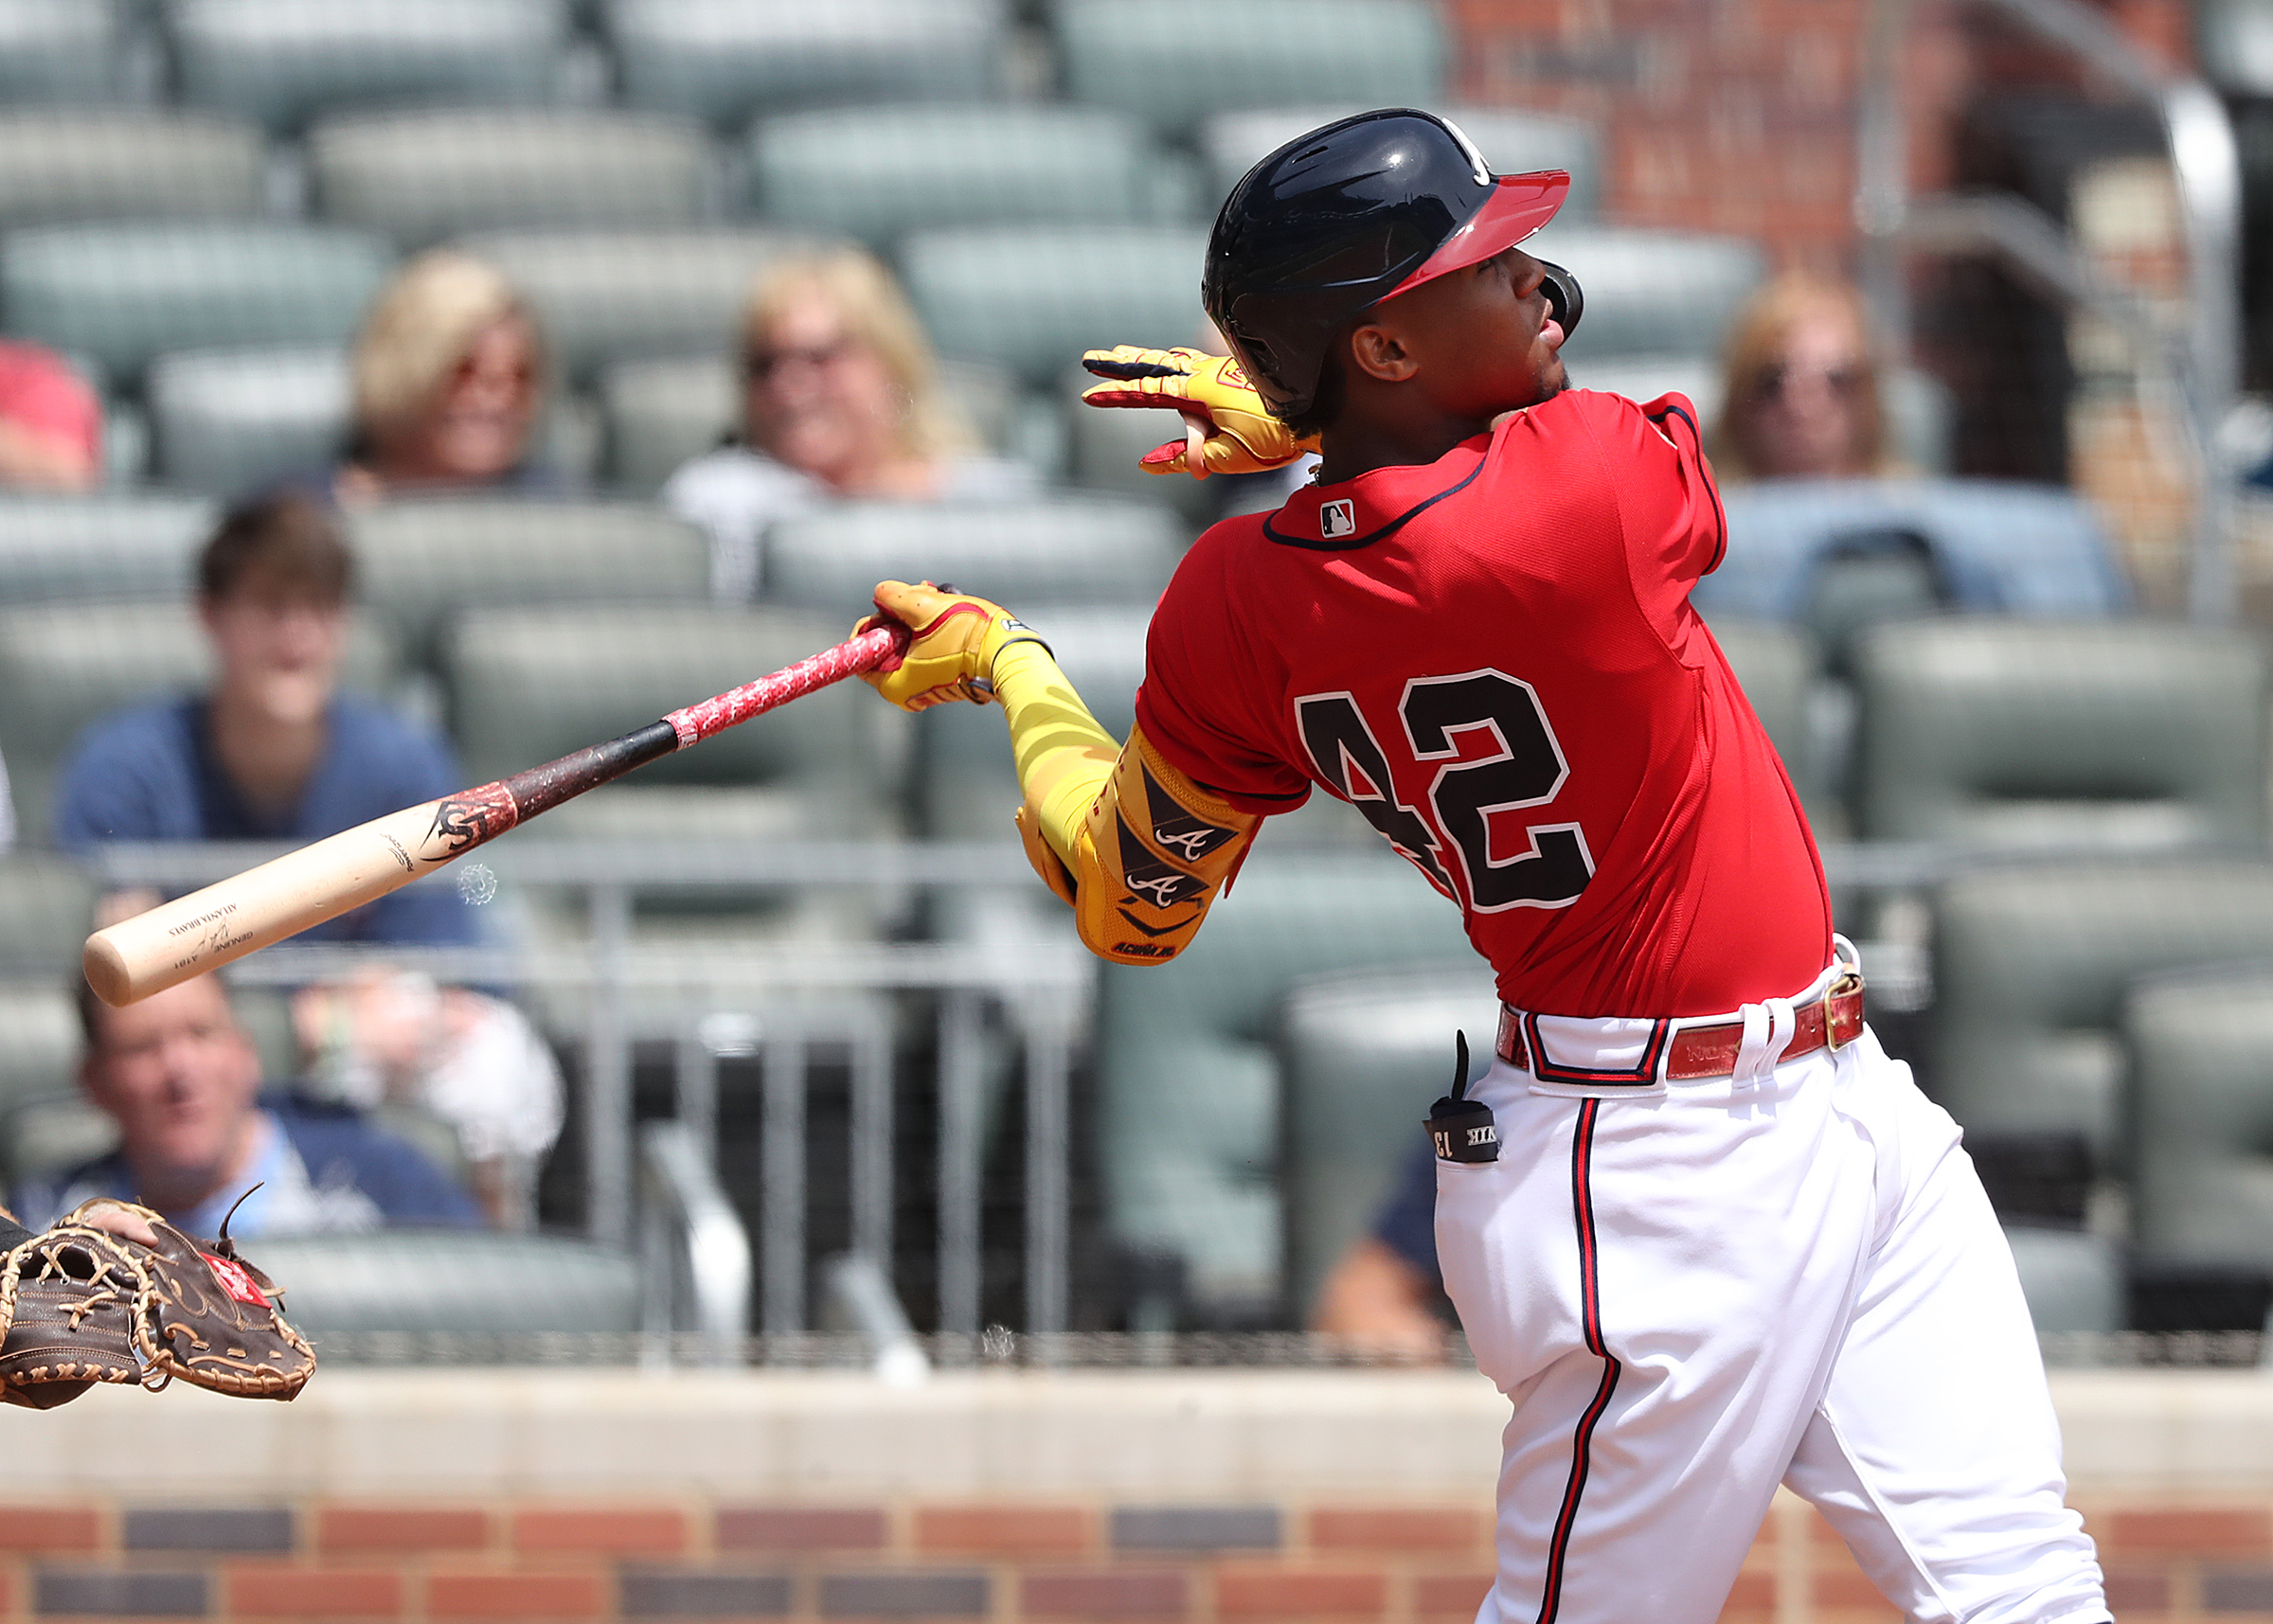 Photos: Braves defeat Marlins on Jackie Robinson Day